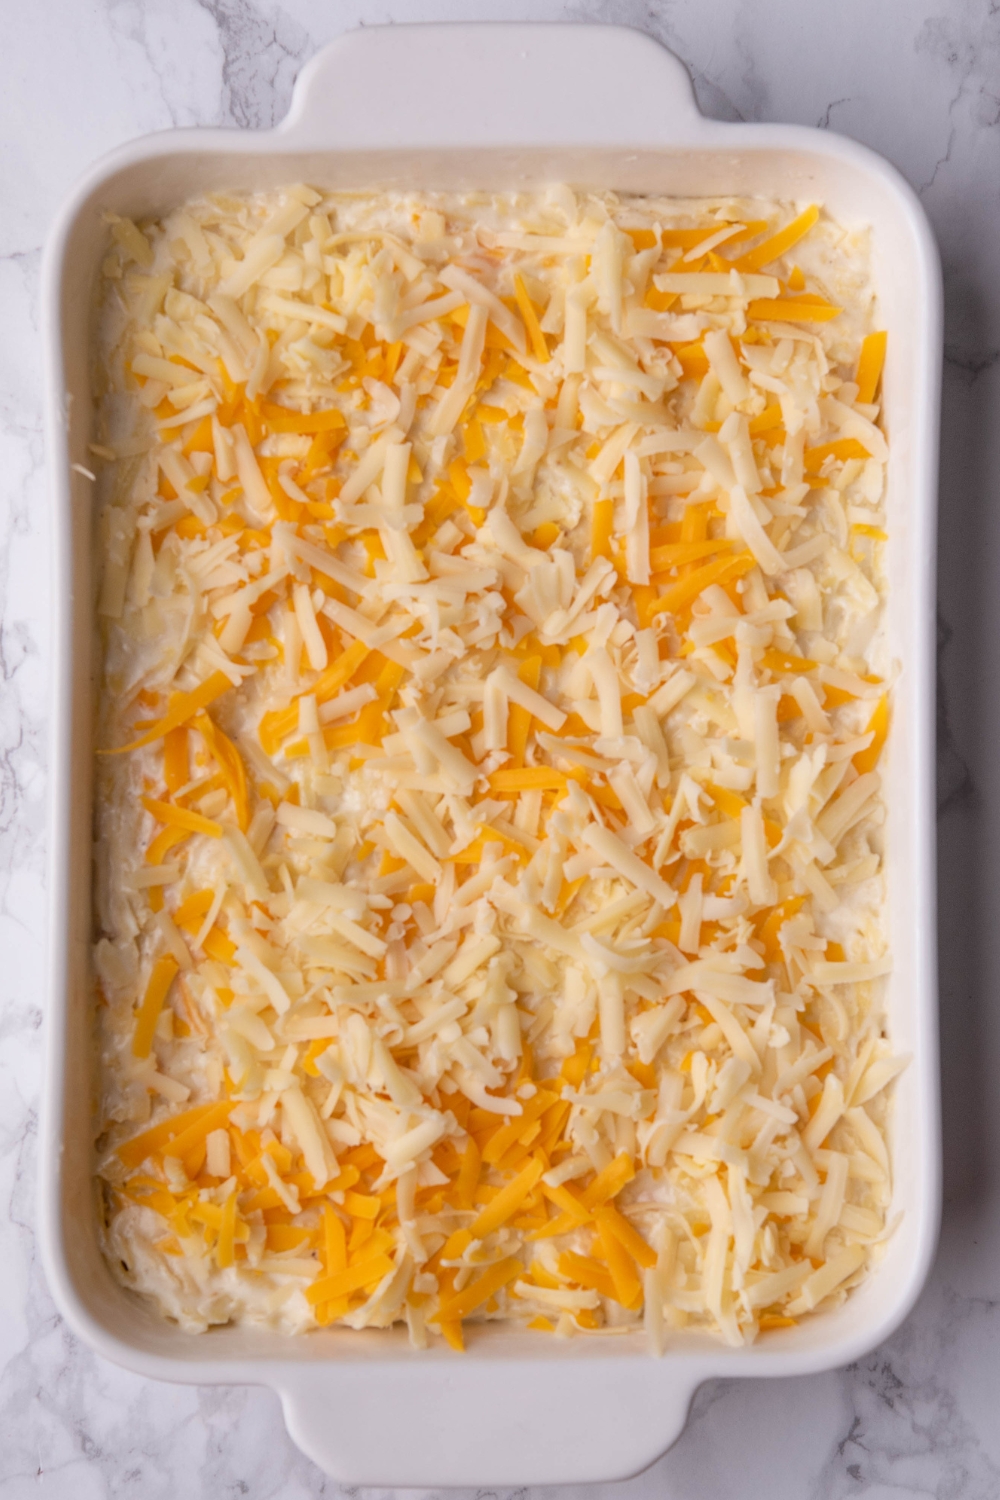 A casserole dish with uncooked hash brown casserole in it.